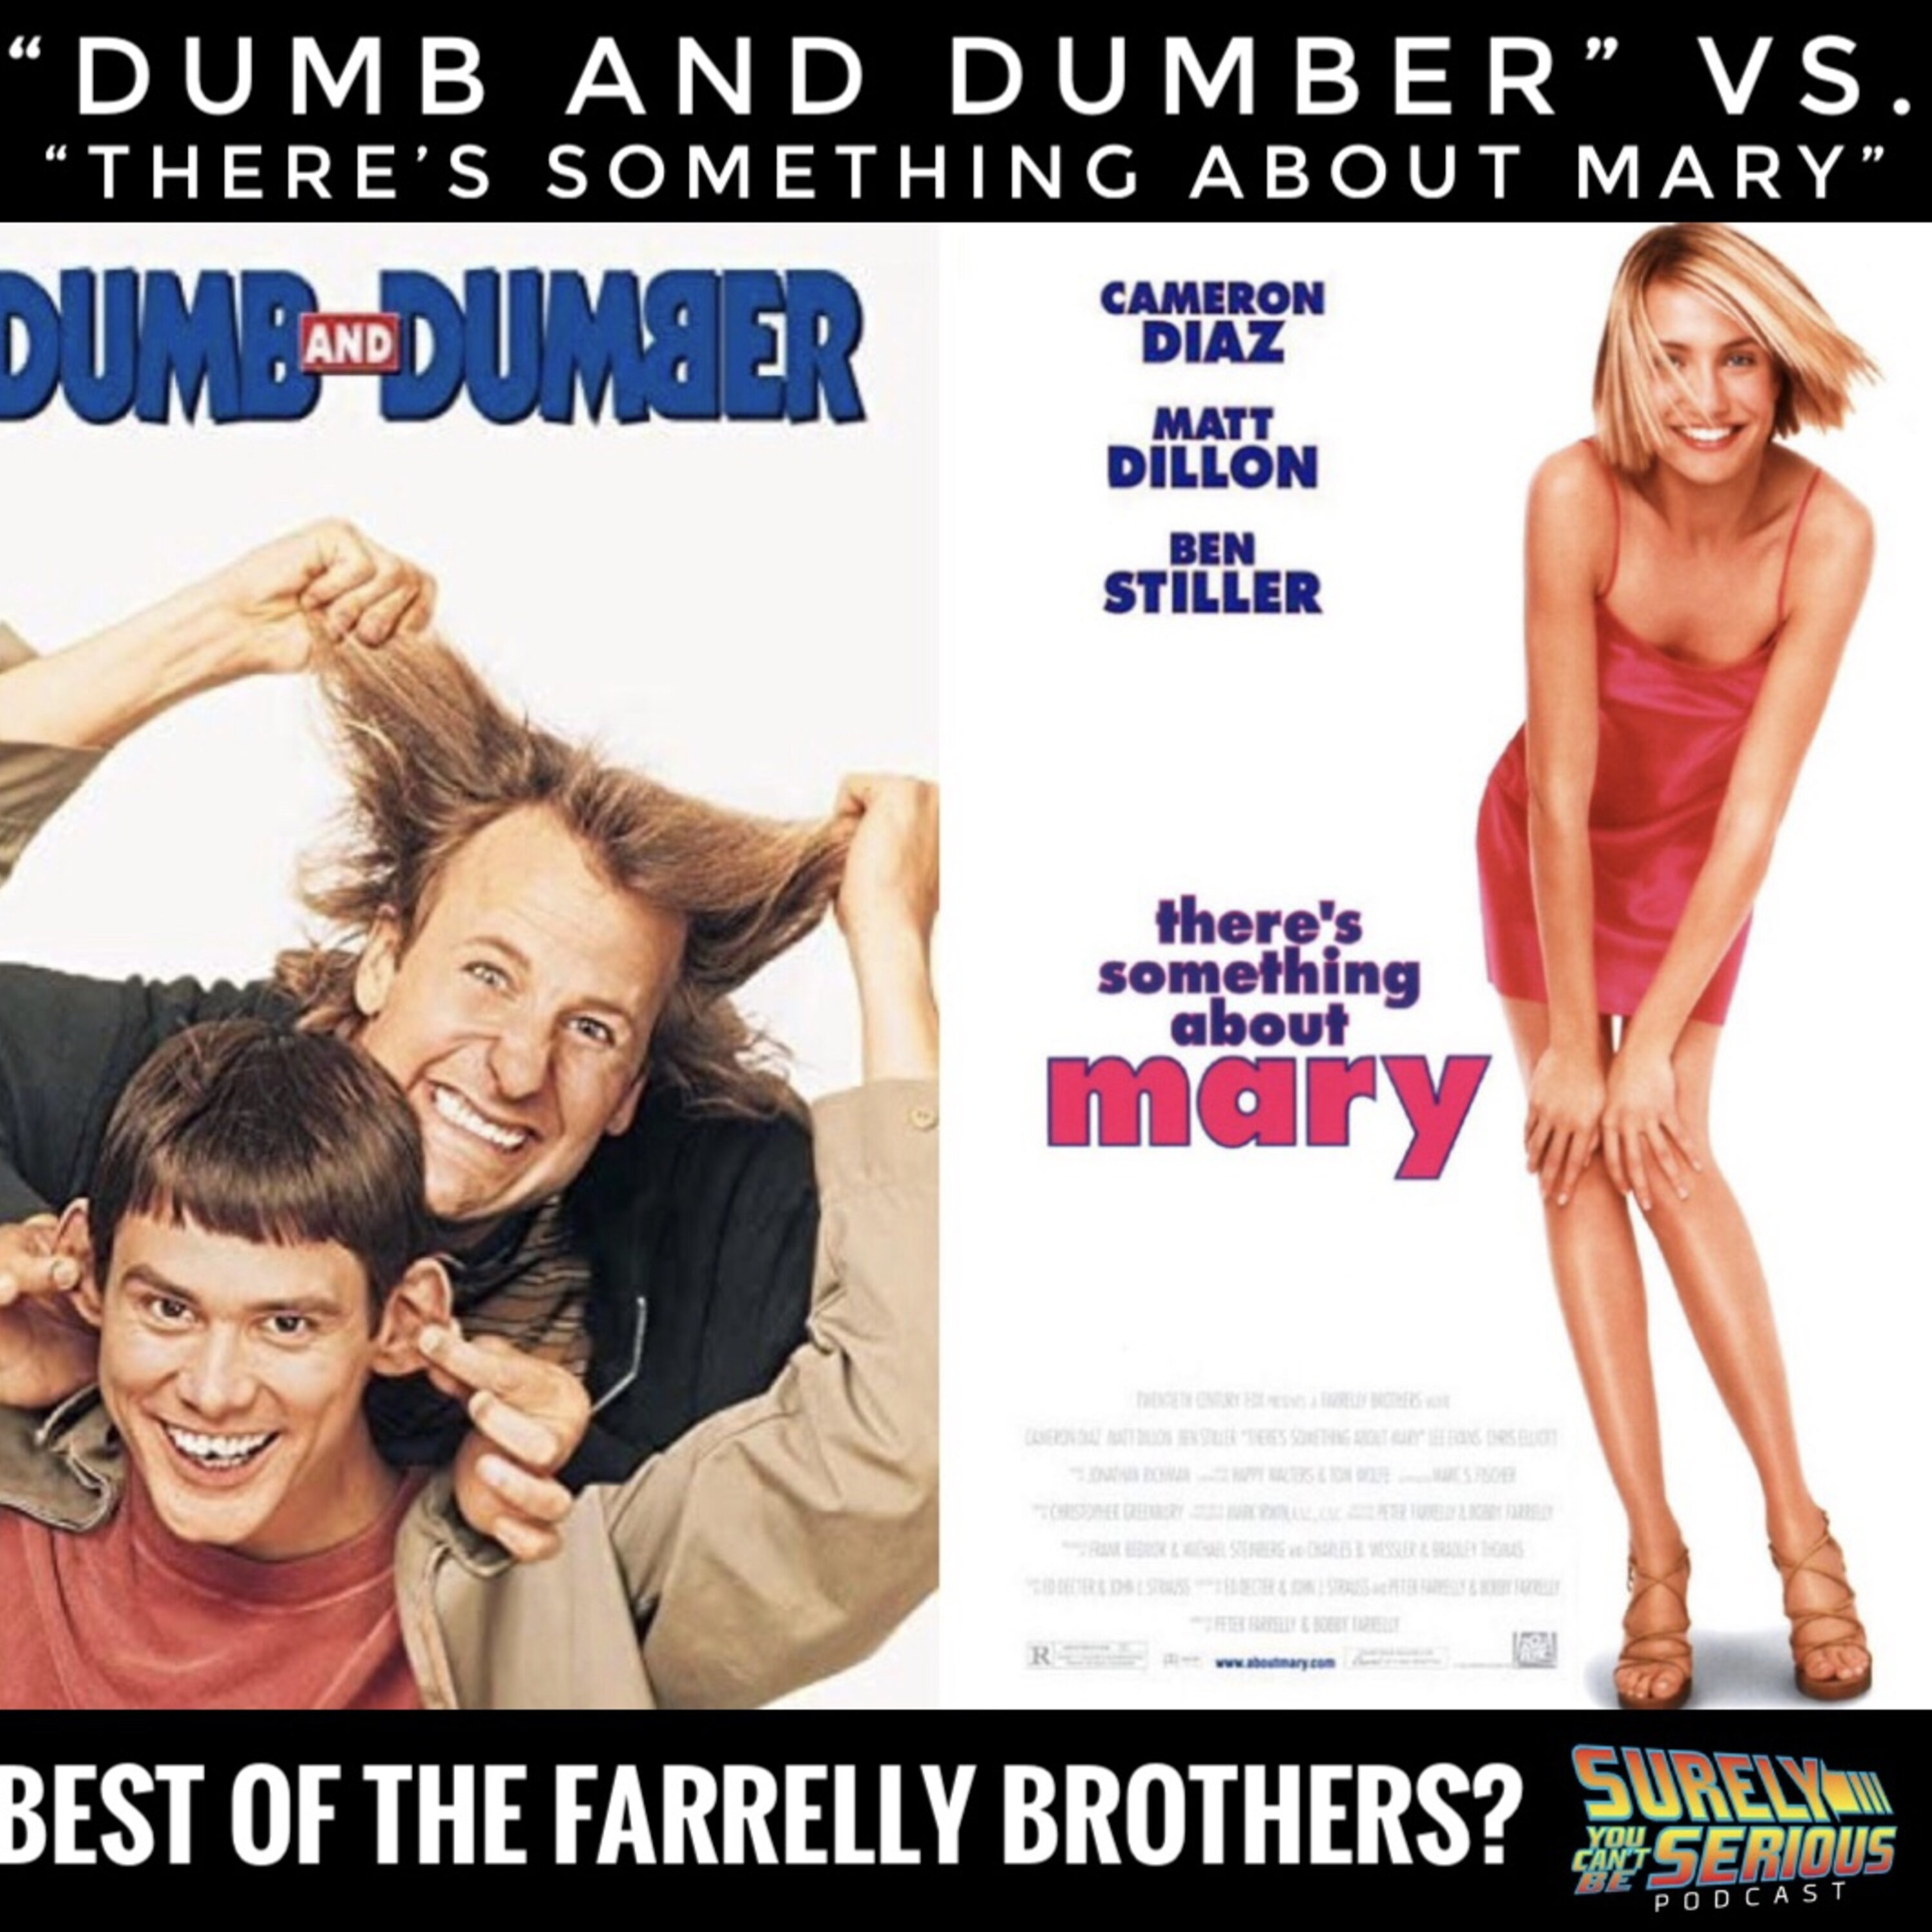 Dumb and Dumber (1994) vs. There's Something About Mary (1998): Part 1 Image